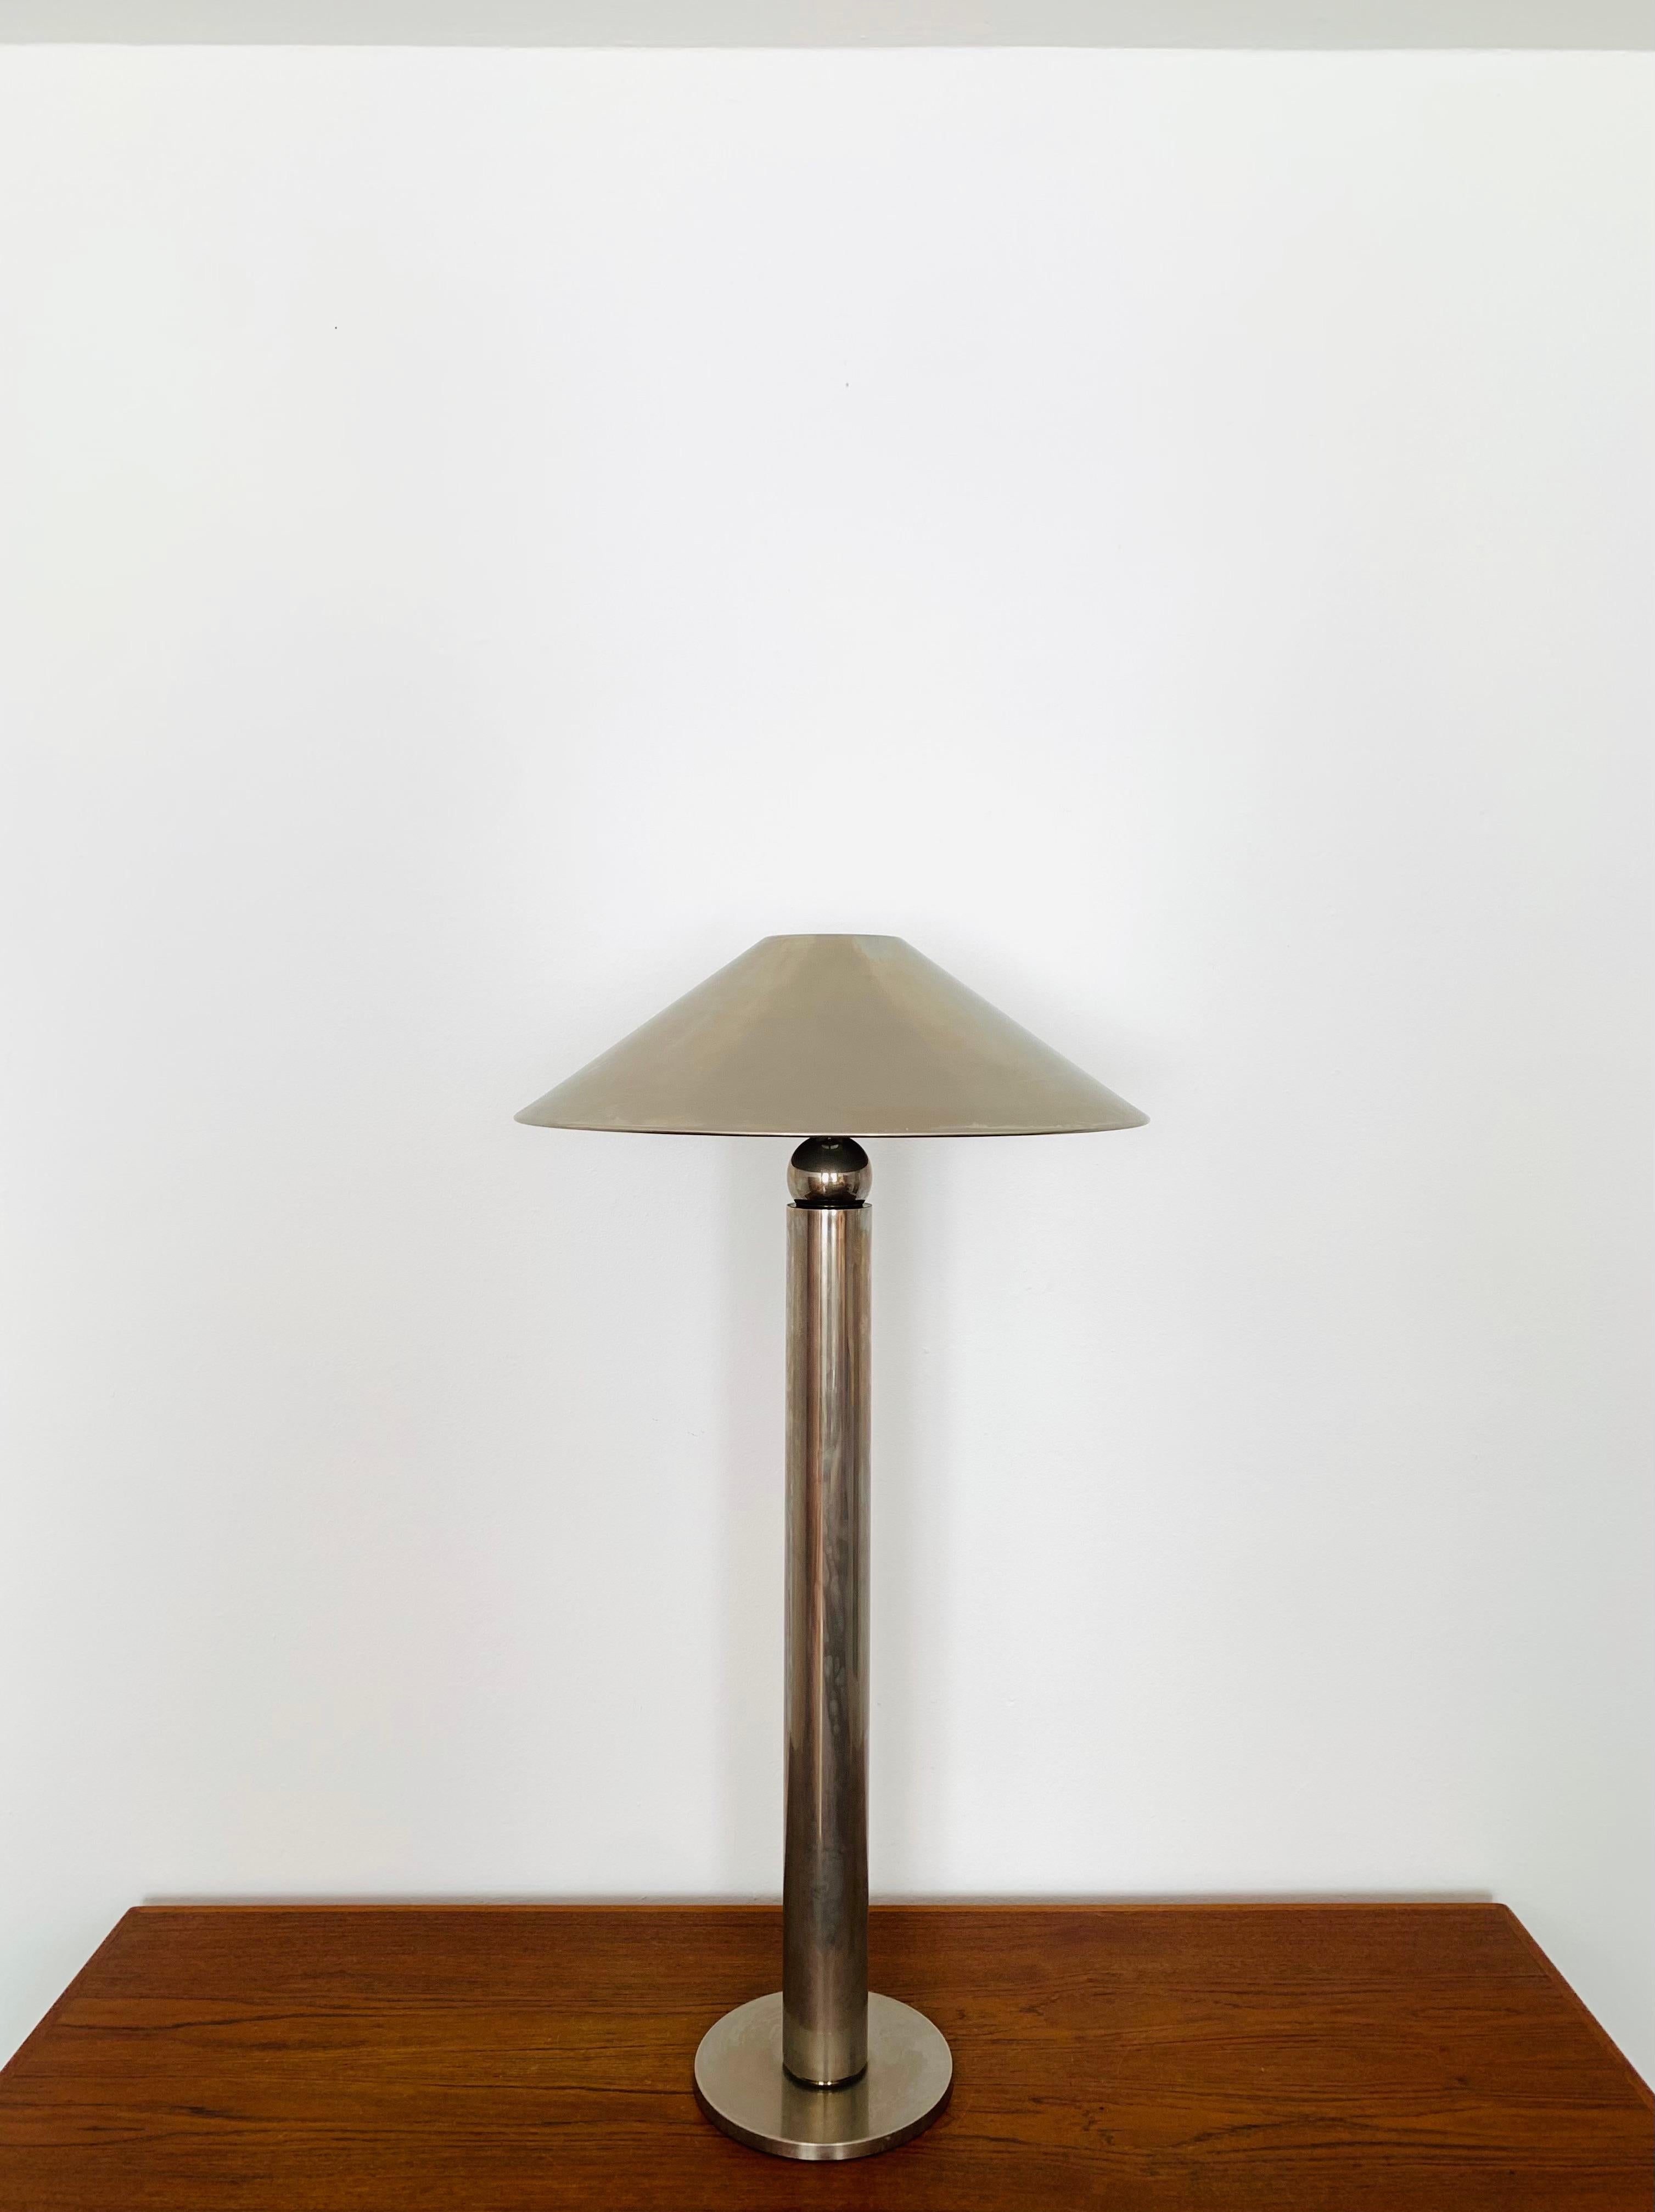 Very beautiful and rare nickel plated floor lamp from the 1970s.
The lighting effect of the lamp is extremely beautiful.
The design and the very beautiful details create a very noble and pleasant light.
The lamp creates a very cozy atmosphere and is